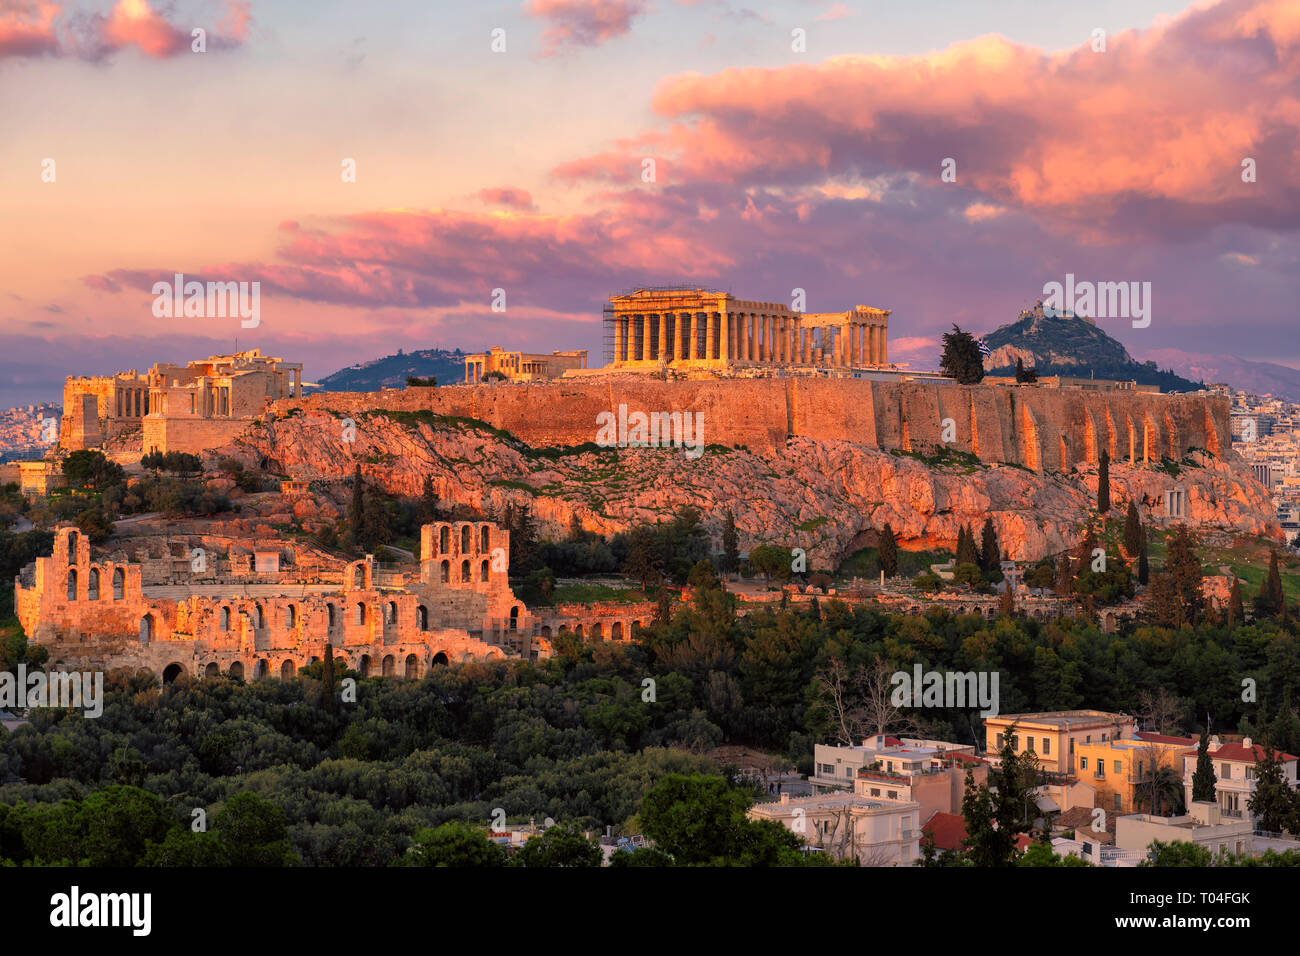 Acropolis at sunset, with the Parthenon Temple Stock Photo